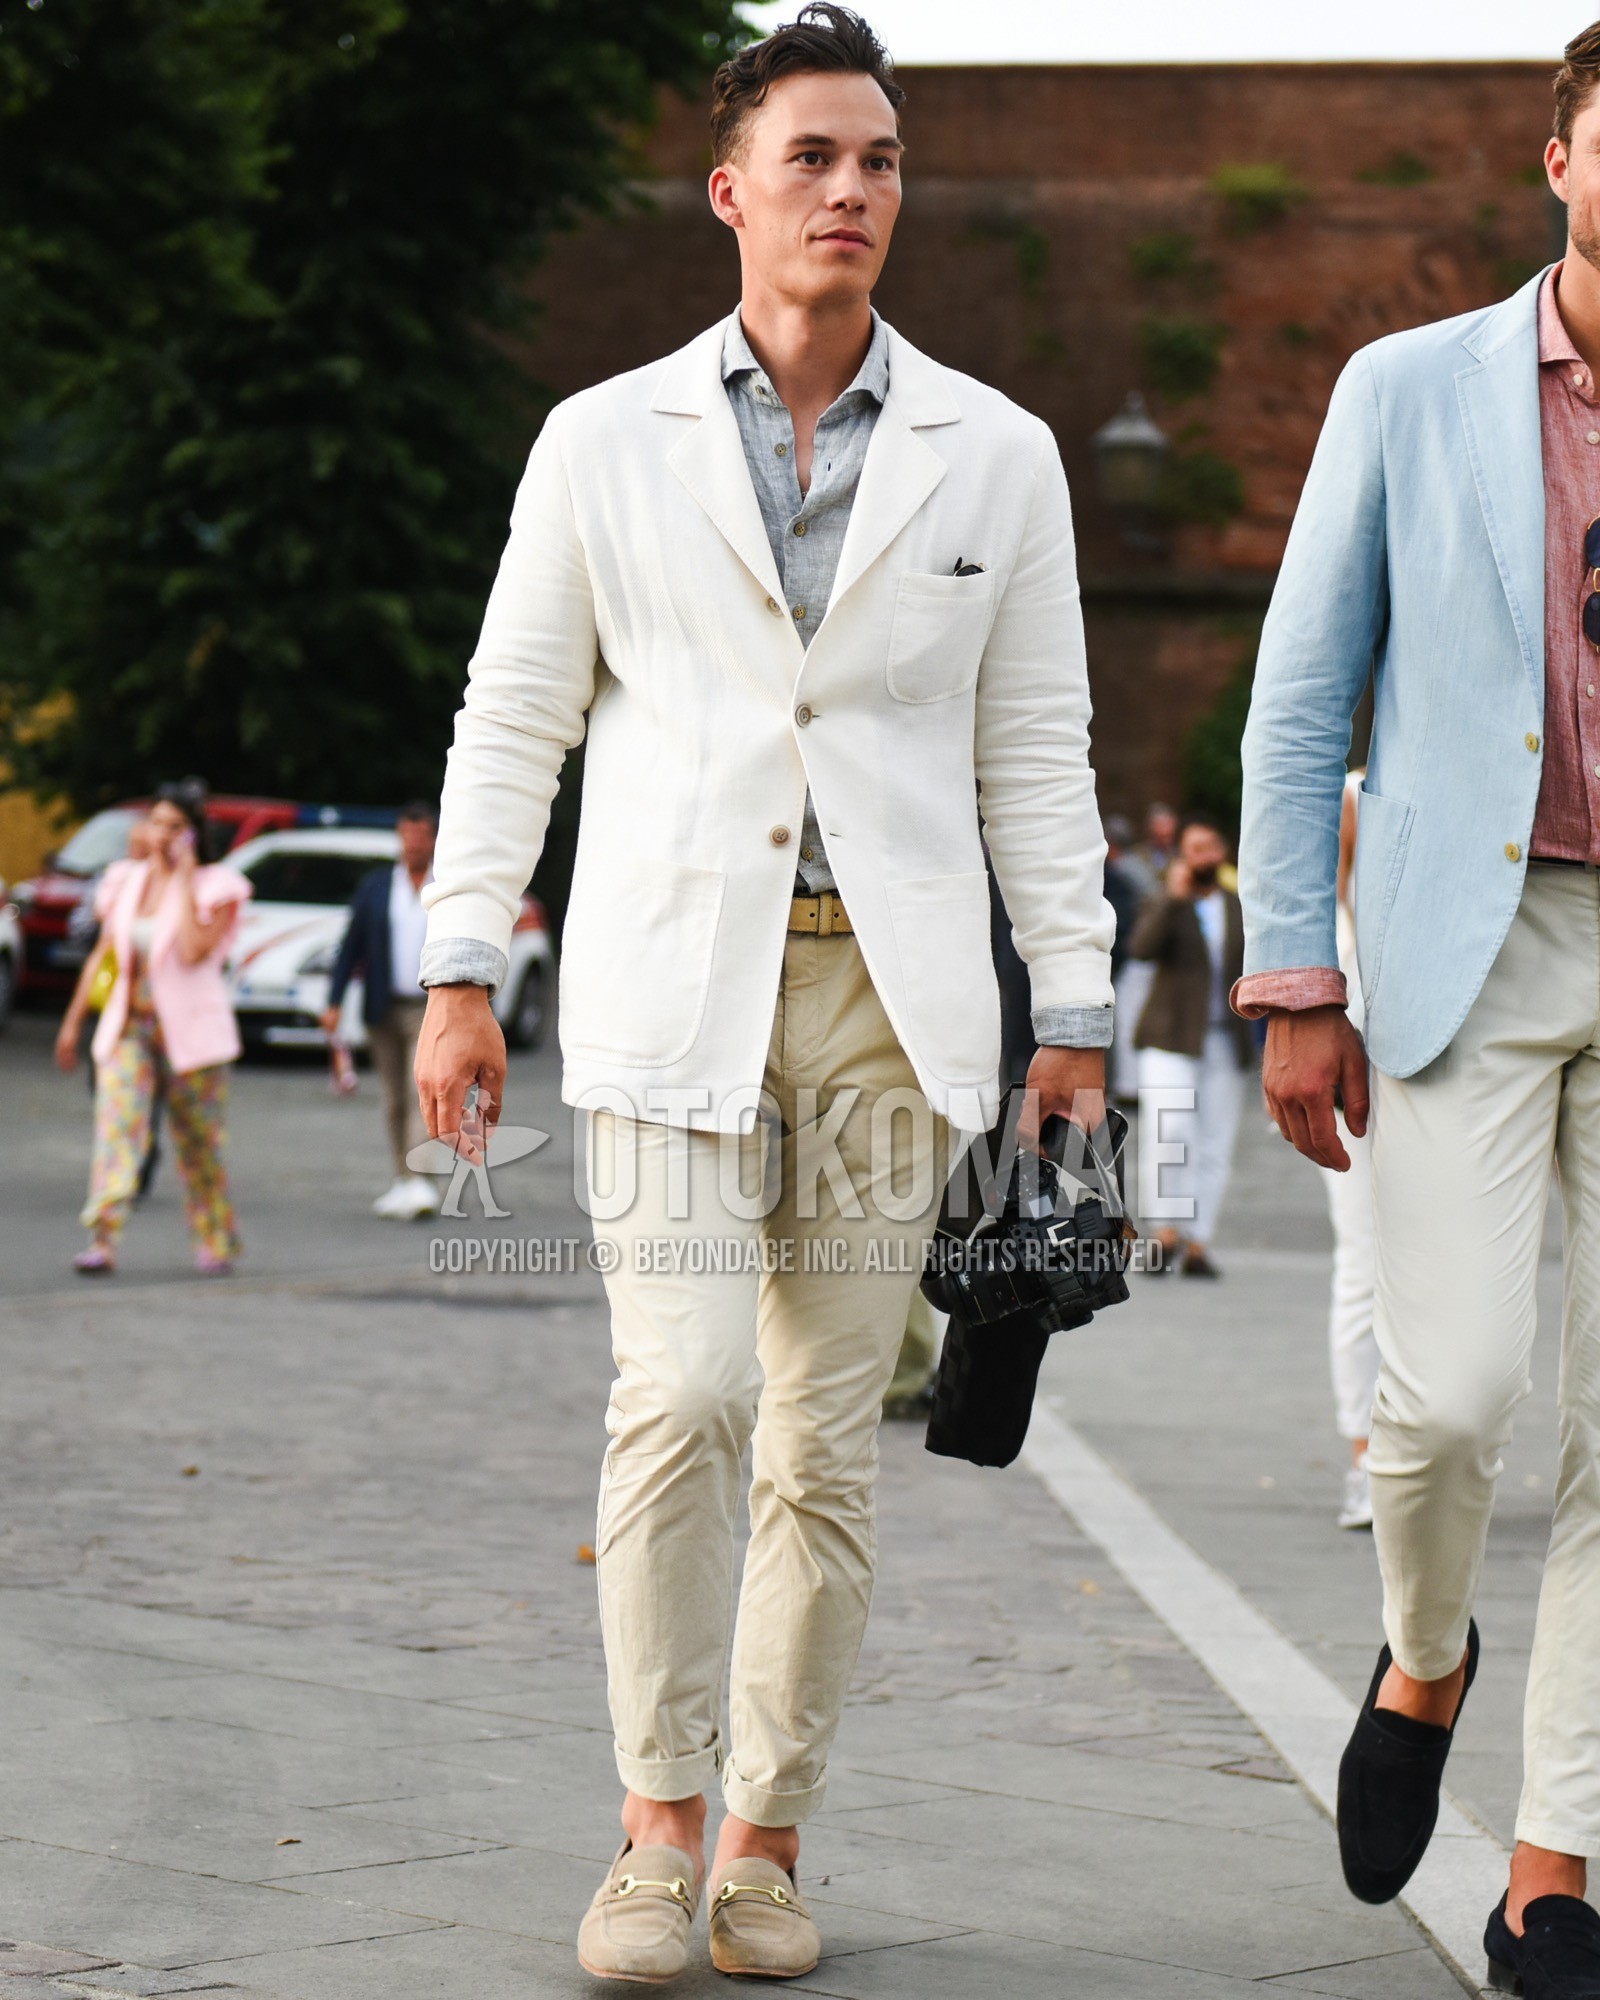 Men's spring summer outfit with white plain tailored jacket, gray plain shirt, brown plain leather belt, beige plain chinos, beige bit loafers leather shoes.